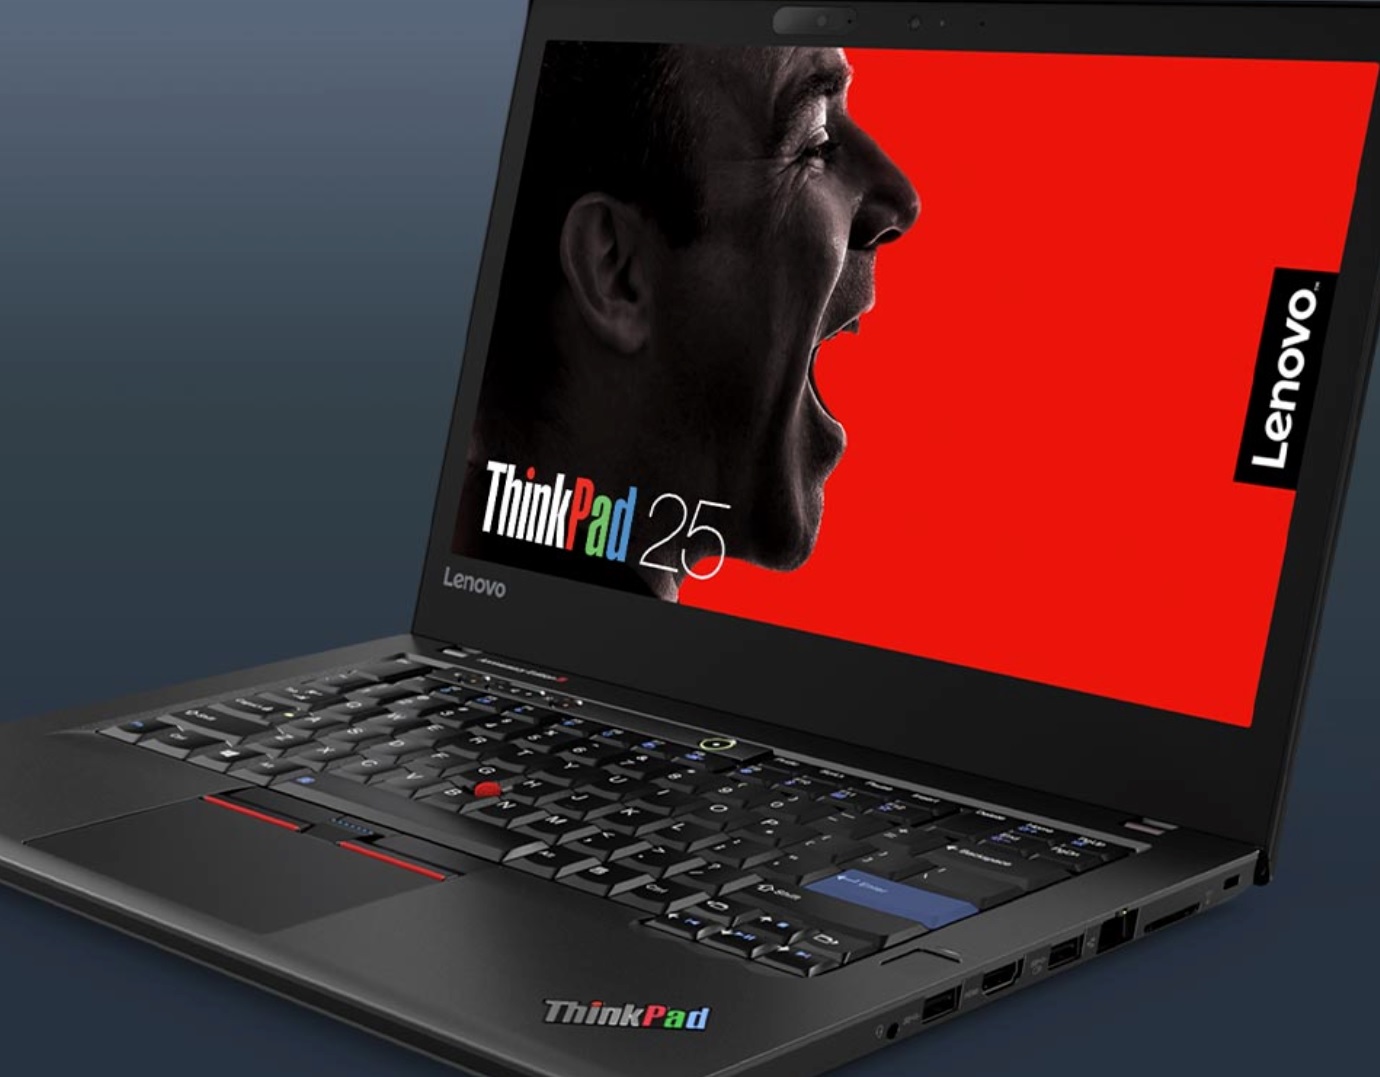 "Limited-Edition ThinkPad Anniversary Edition 25" lanseres faktisk i Norge.